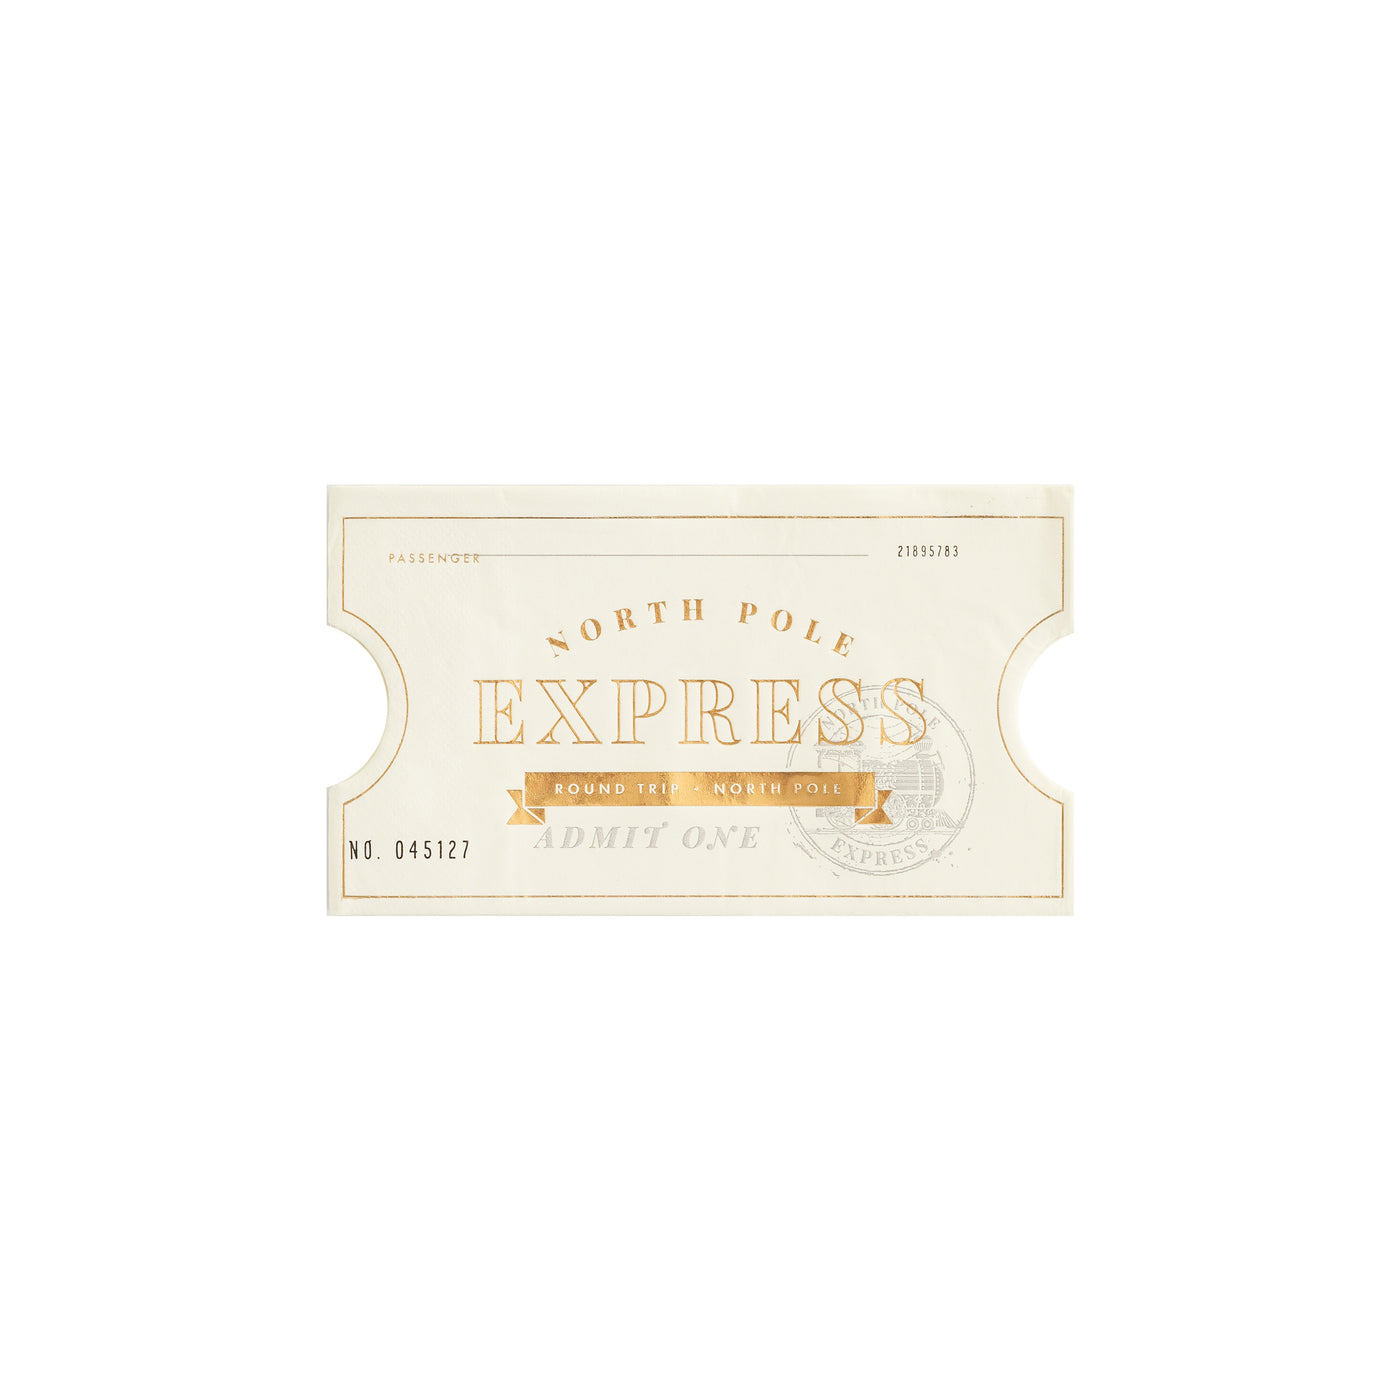 PRESALE SHIPPING MID OCTOBER - NOR939 - North Pole Express Ticket Shaped Guest Napkin